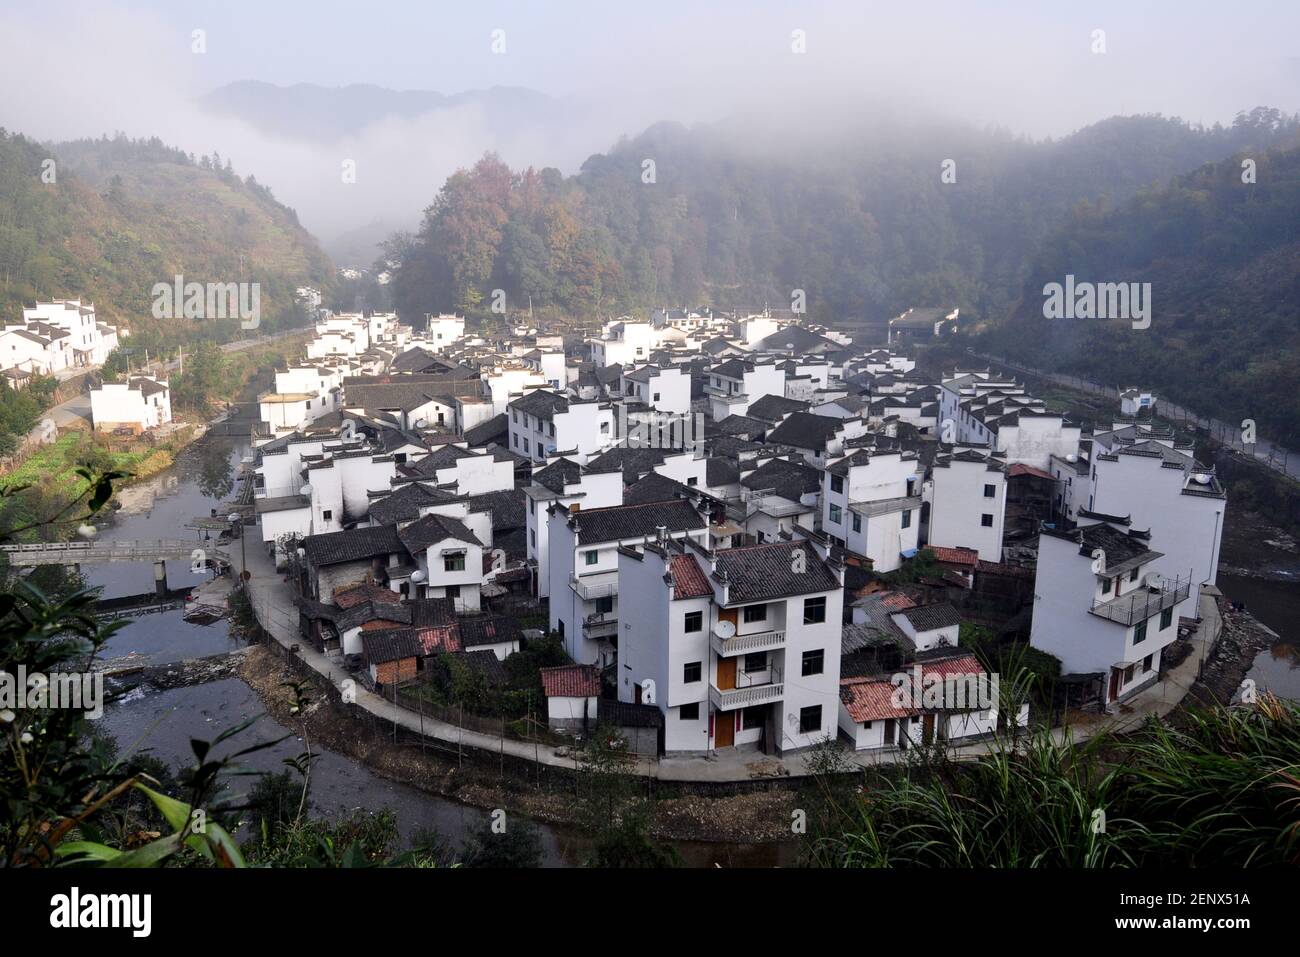 Jiangxi ,CHINA-Jujing village is located in the big zhang mountain township of Wuyuan county, Shangrao city, Jiangxi province.The whole village has a unique layout and profound cultural deposits. It is a typical village surrounded by mountains and water, surrounded by high mountains and a stream. It is in line with the design of "behind mountains and in front of water" of the eight diagrams of China, and is known as "the most round village in China", just like a paradise.(EDITORIAL USE ONLY. CHINA OUT) (Photo by /Sipa USA) Stock Photo